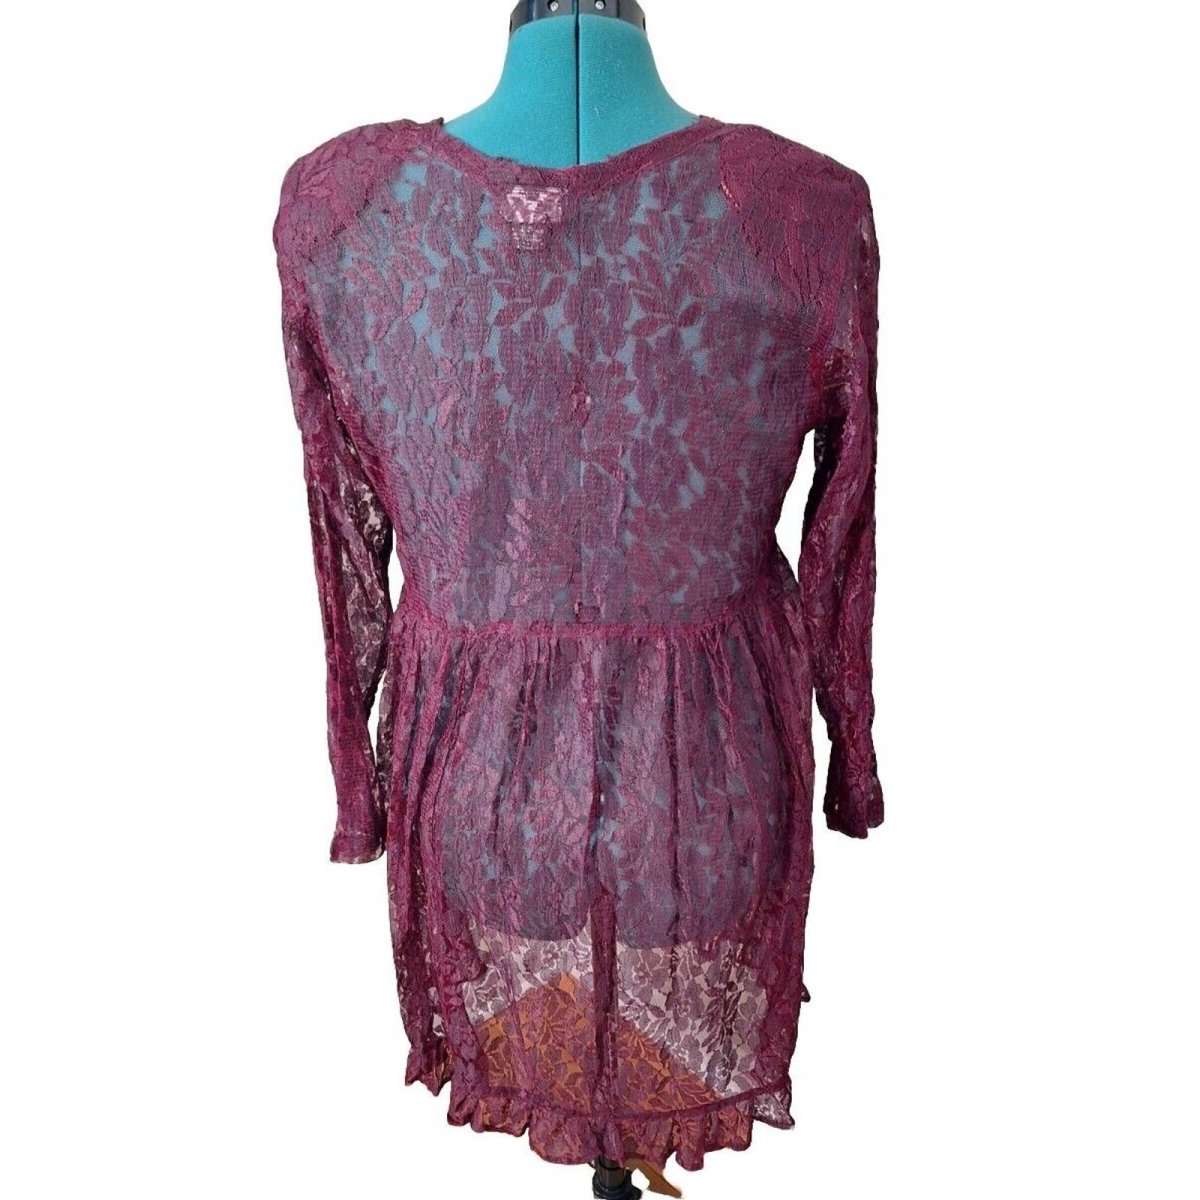 Vintage 90s Oxblood Sheer Lace Babydoll Dress Women's Size Medium - themallvintage The Mall Vintage